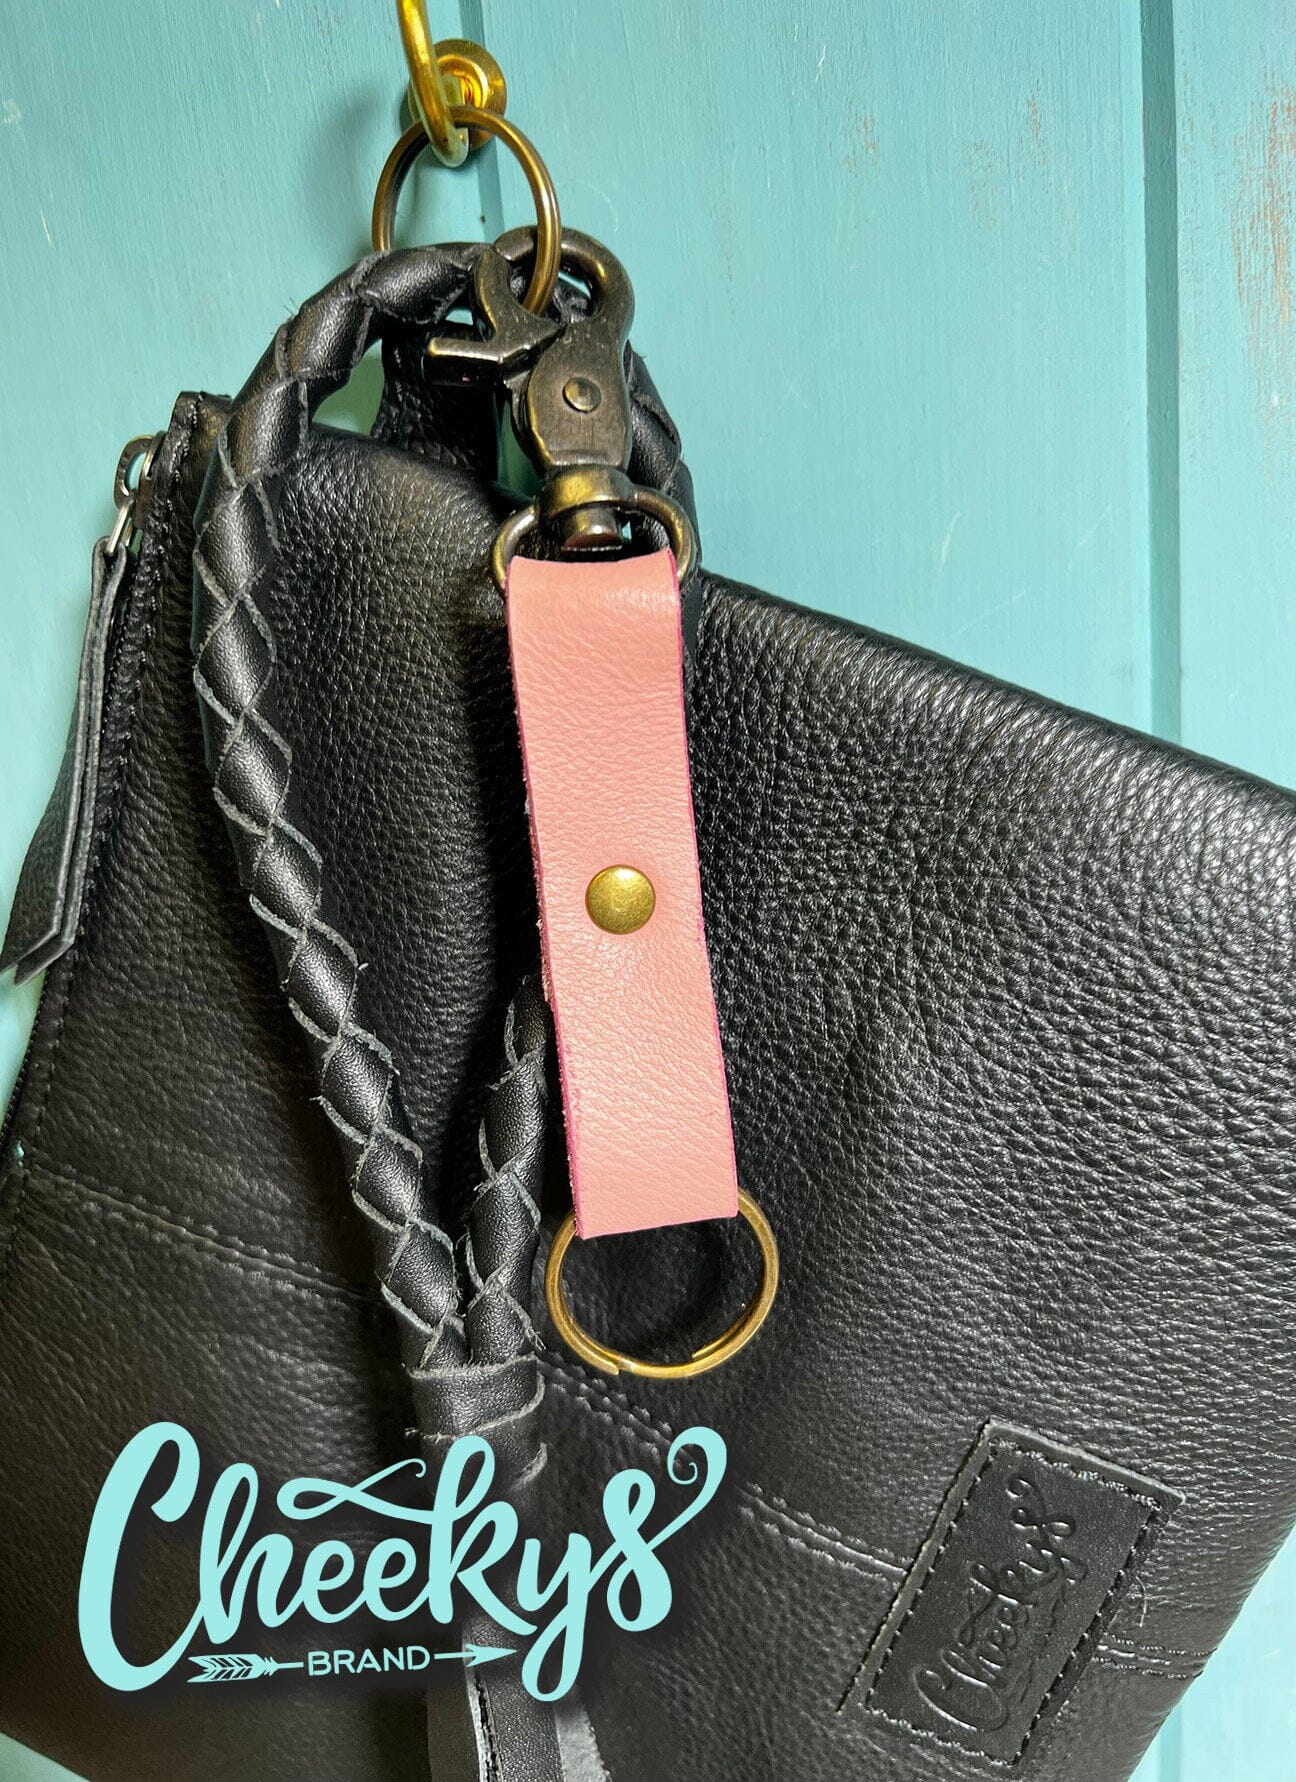 Leather Keychain Cheekys Brand Pink Leather 